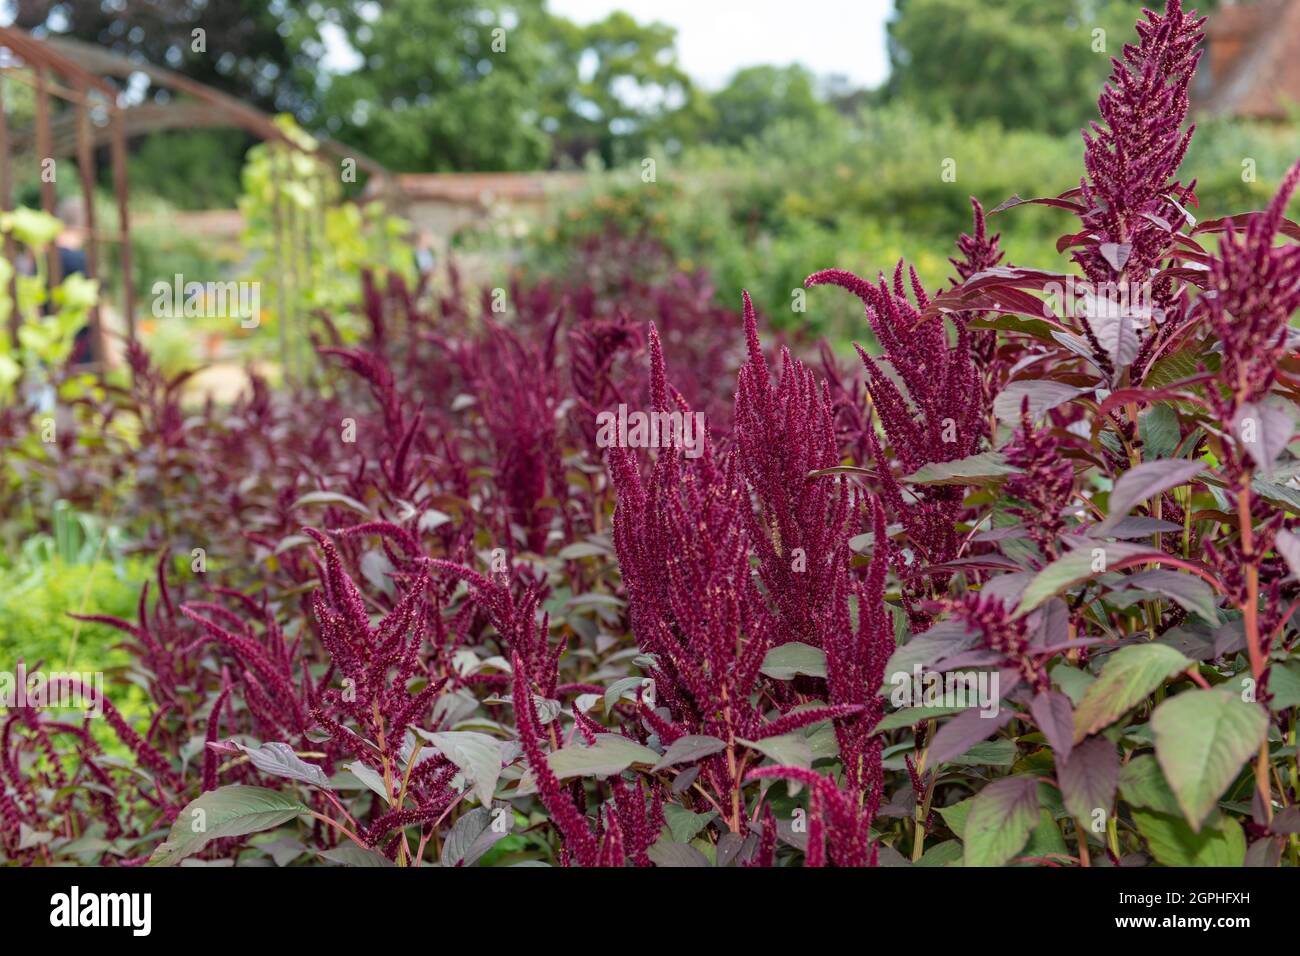 Close up of a Prince of Wales feather (amaranthus hypochondriacus) flower in bloom Stock Photo